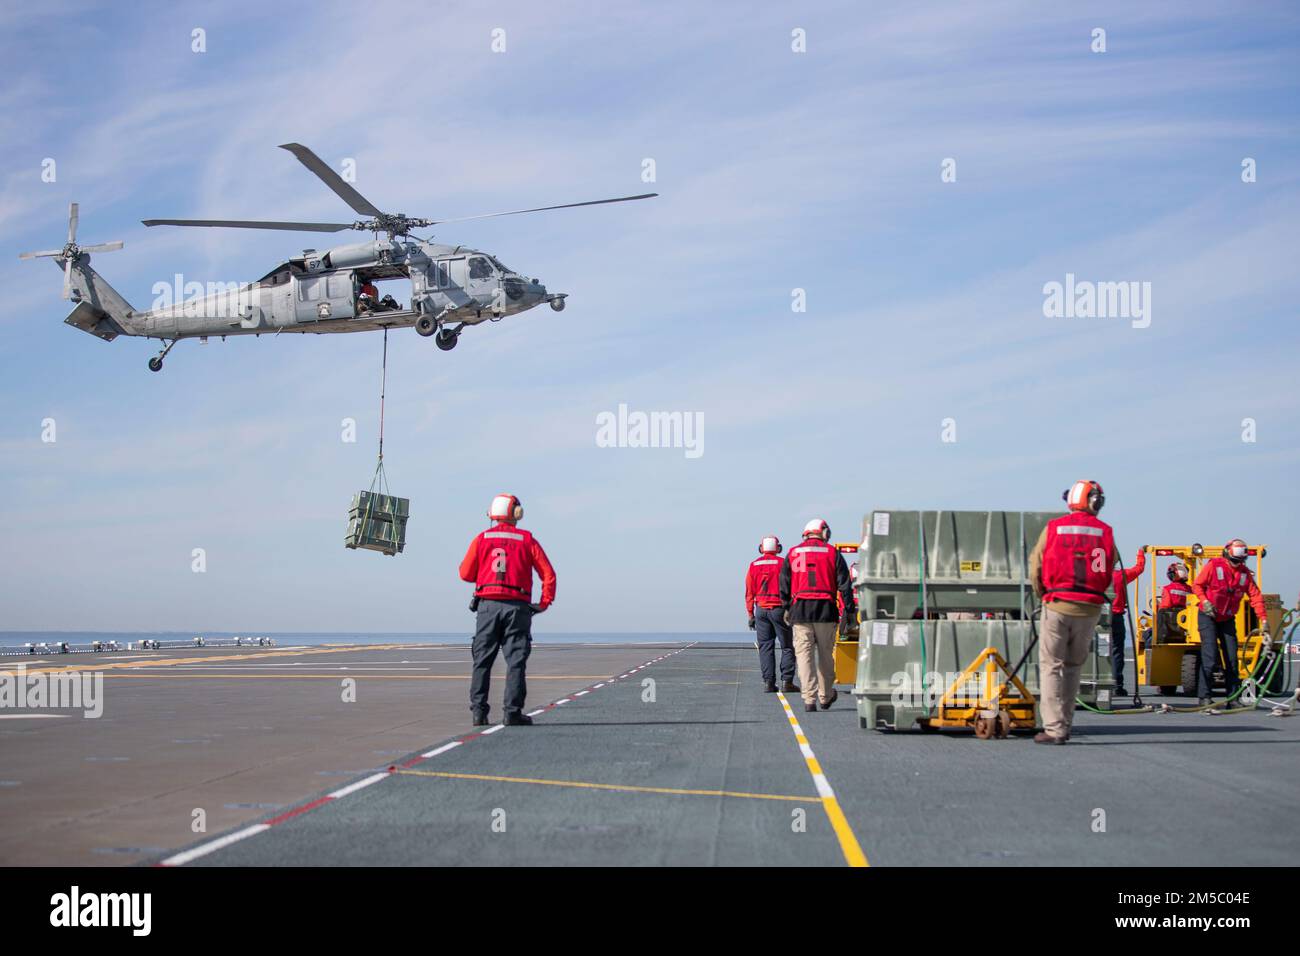 220225-N-CZ759-1211 PACIFIC OCEAN (Feb. 25, 2022) – An MH-60S Sea Hawk helicopter assigned to Helicopter Sea Combat Squadron (HSC) 23 delivers a pallet of ammunition to amphibious assault ship USS Tripoli’s (LHA 7) flight deck, Feb. 25. Tripoli is underway conducting routine operations in U.S. 3rd Fleet. Stock Photo